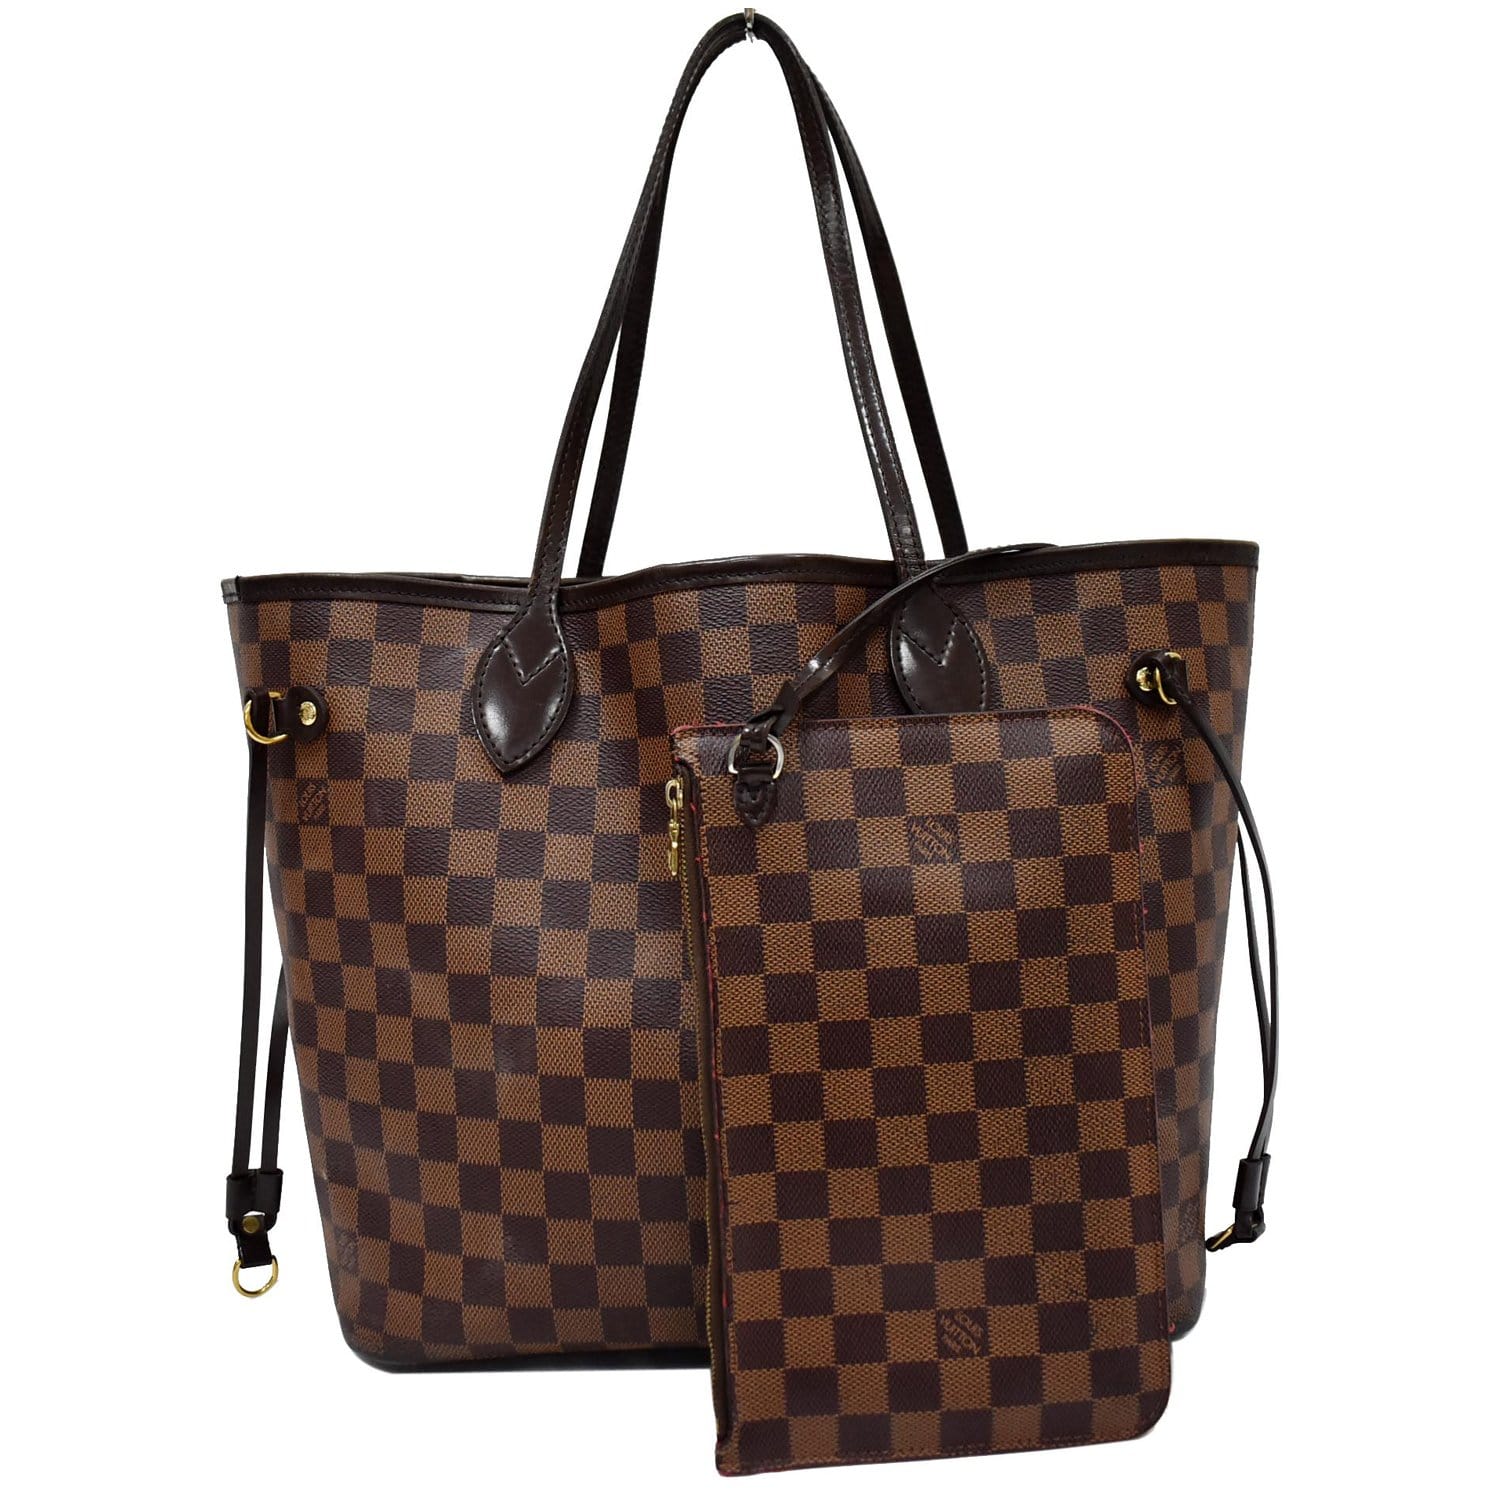 The NEW Louis Vuitton Neverfull BB - small bag at a big price